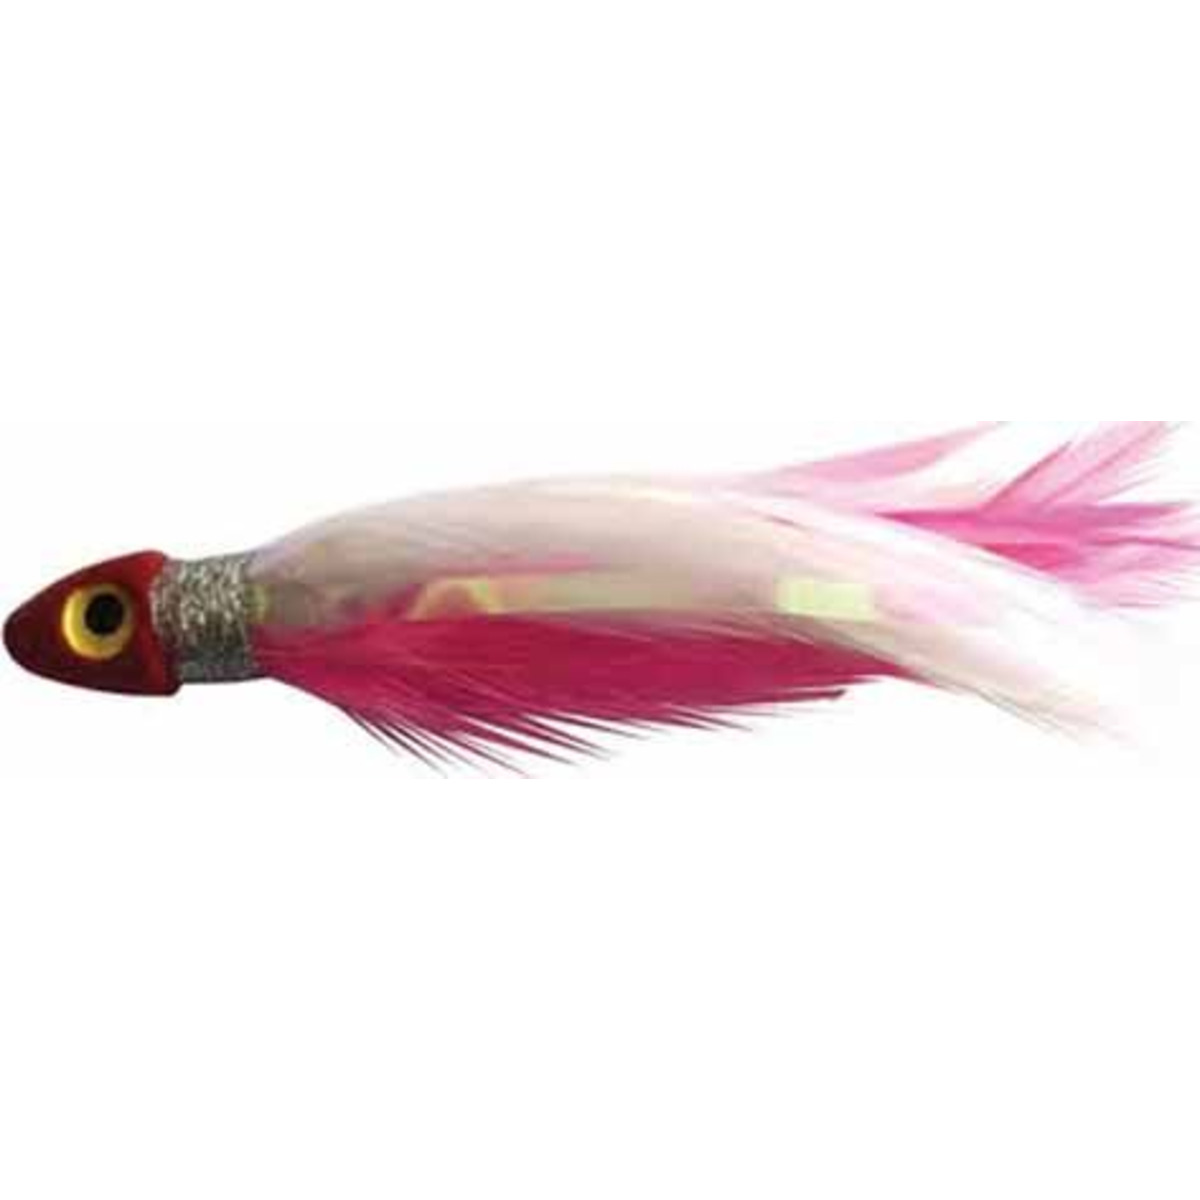 H2o Pro Feather Jet - Pink White - 19 g - 8.5 cm